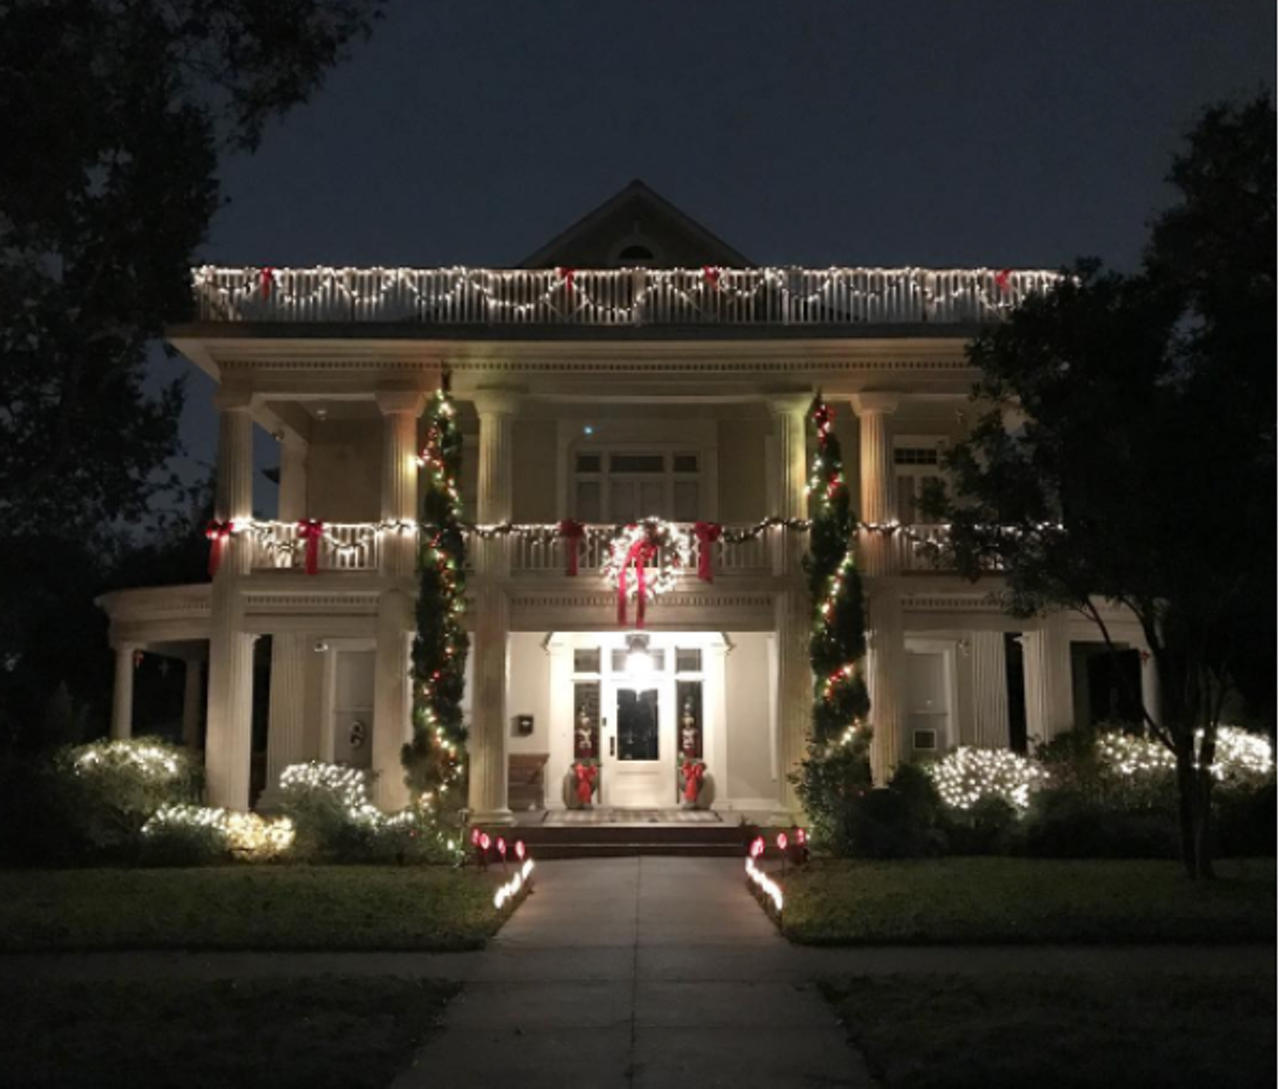 Monte Vista
Christmas lights just look better when they’re carefully placed on beautiful homes. Though not an official display or event, Monte Vista makes for a prime spot for tricked-out displays. Take a drive through the neighborhood and admire these homes that fit the season just right.
Photo via Instagram /  sun_carlos